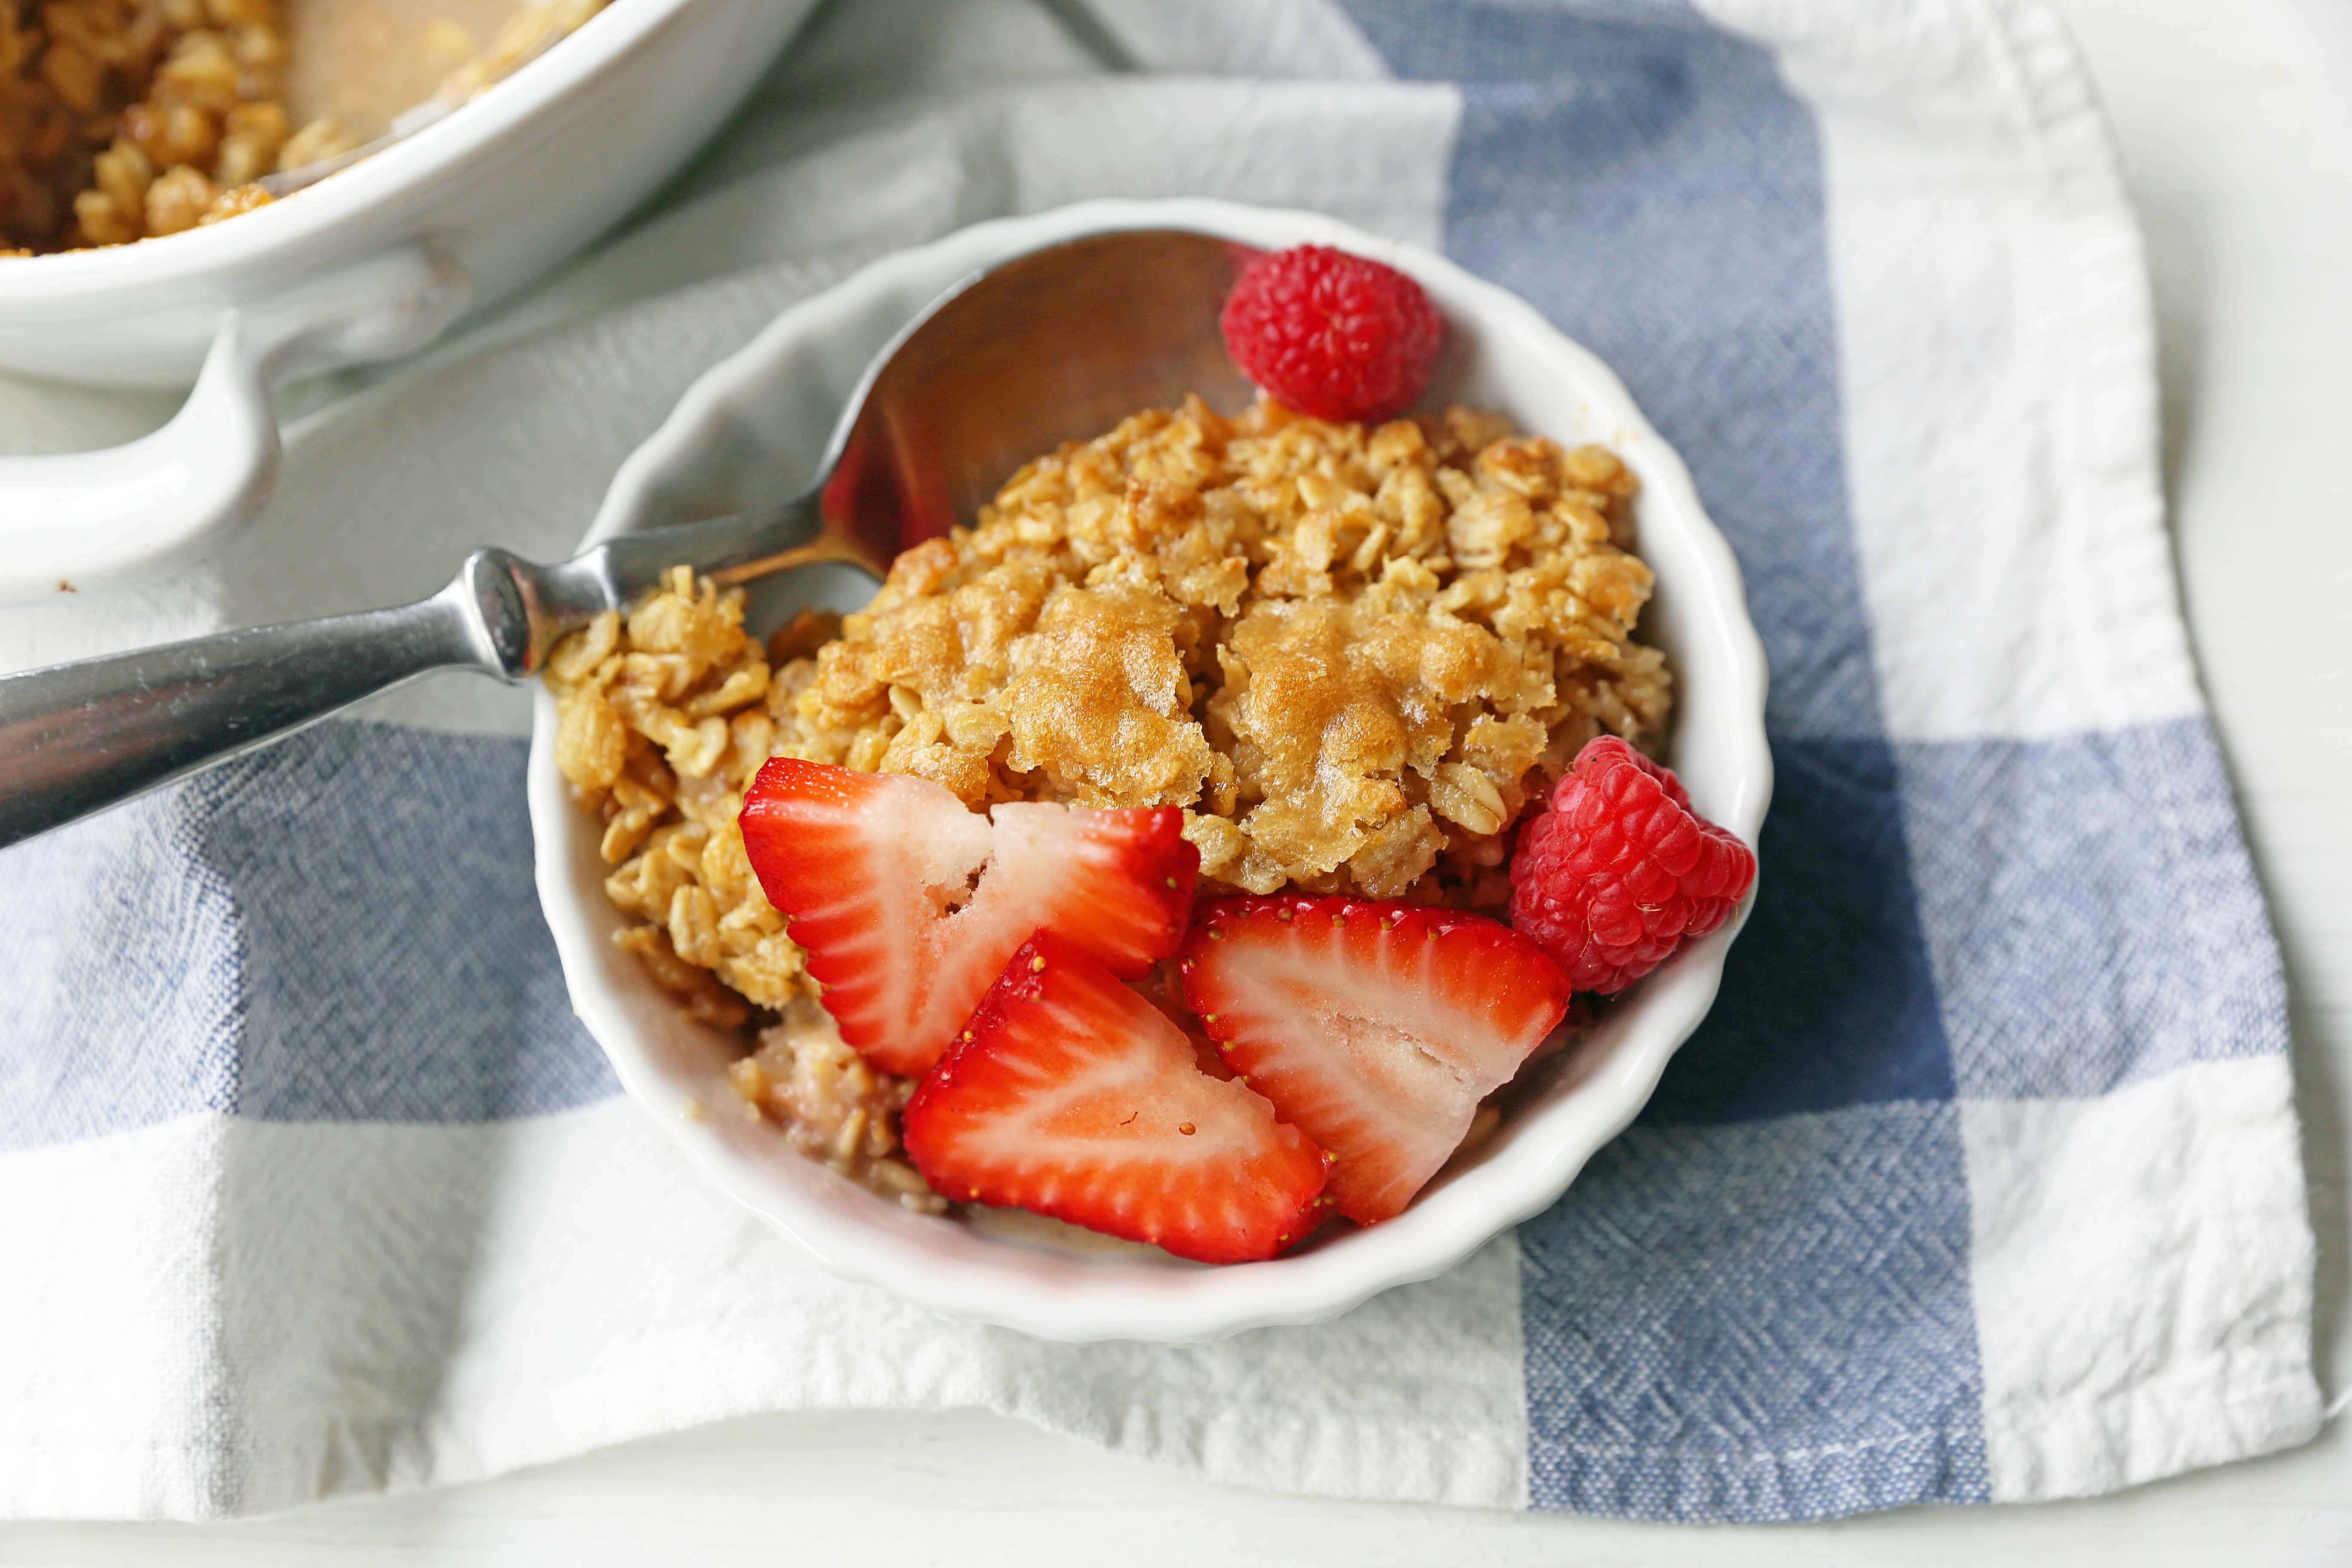 Baked Oatmeal. Brown Sugar Baked Oatmeal. A warm, comfort food breakfast is a perfect way to serve a crowd or to re-heat for those busy mornings.  www.modernhoney.com #bakedoatmeal #oatmeal #oatmealbake #brownsugaroatmeal